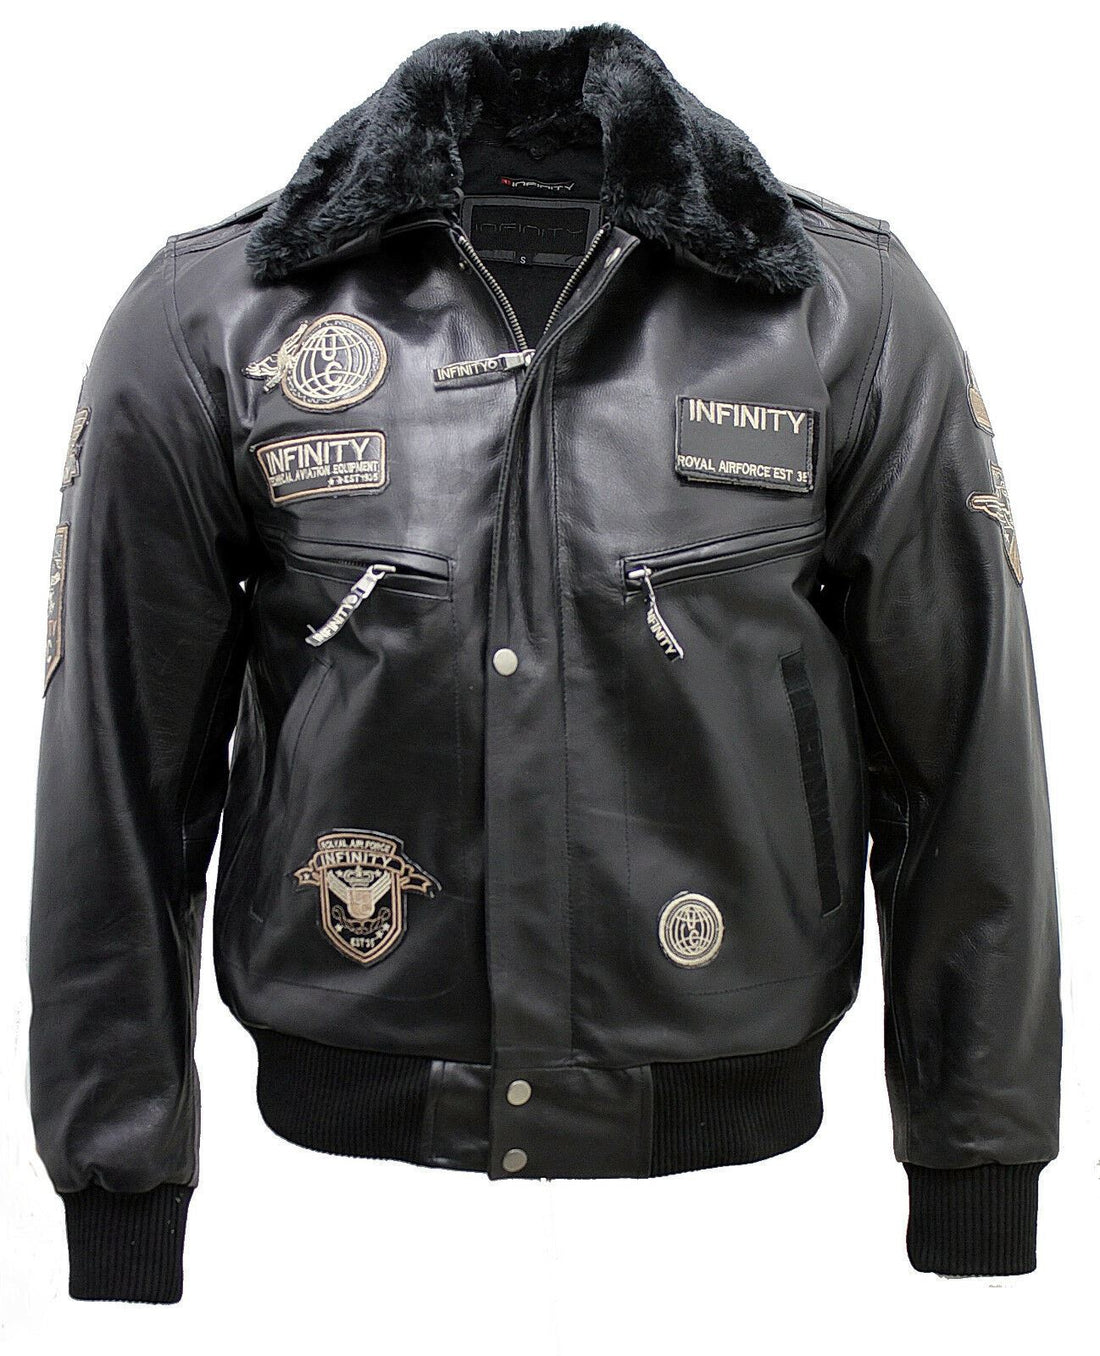 Mens US Badged Air Force Bomber Jacket-Clare - Upperclass Fashions 